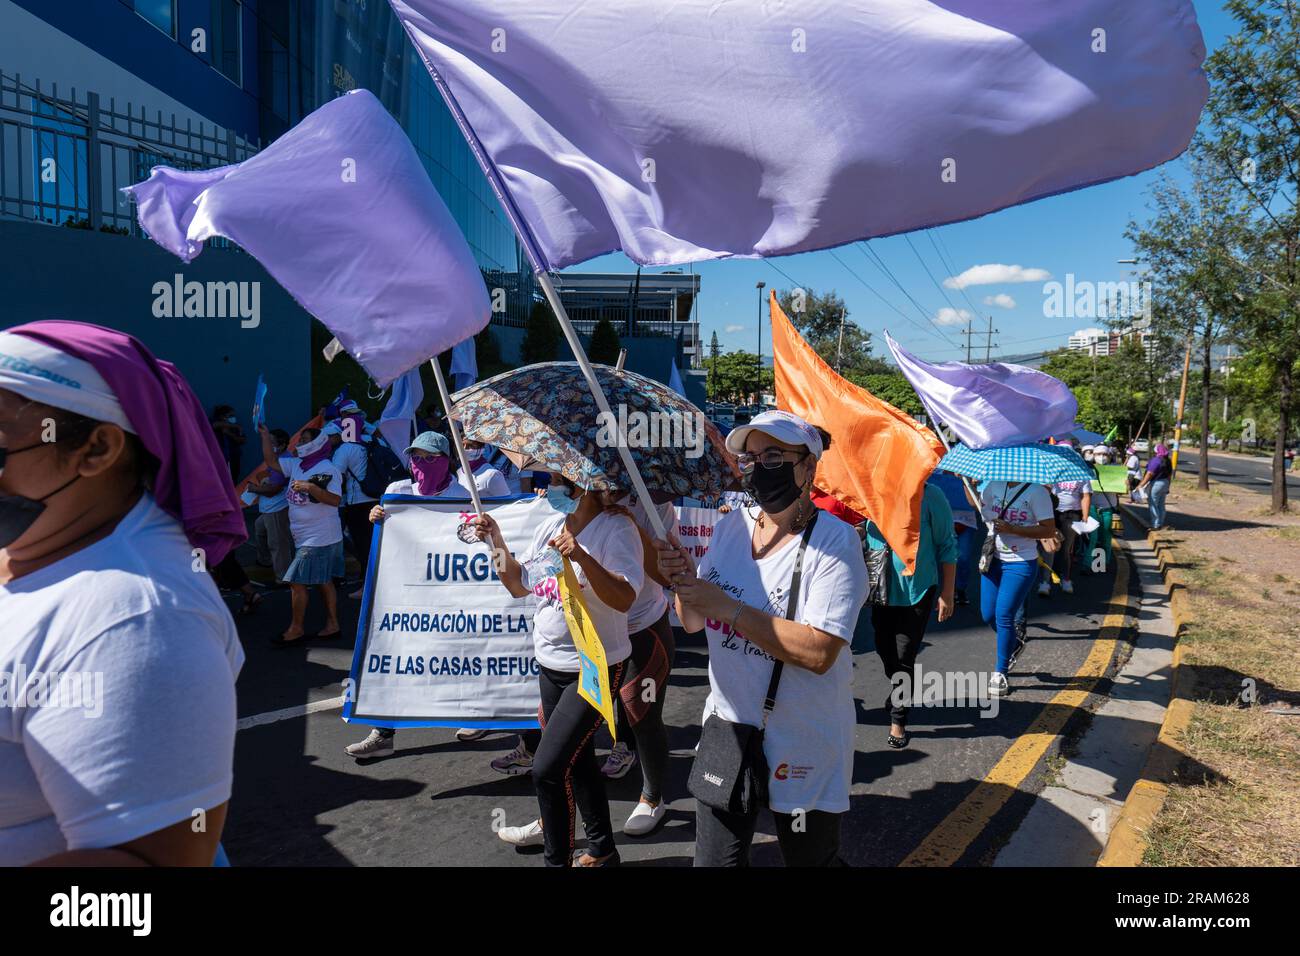 Tegucigalpa, Francisco Morazan, Honduras - November 25, 2022: Several Women with Flags March for the International Day for the Elimination of Violence Stock Photo